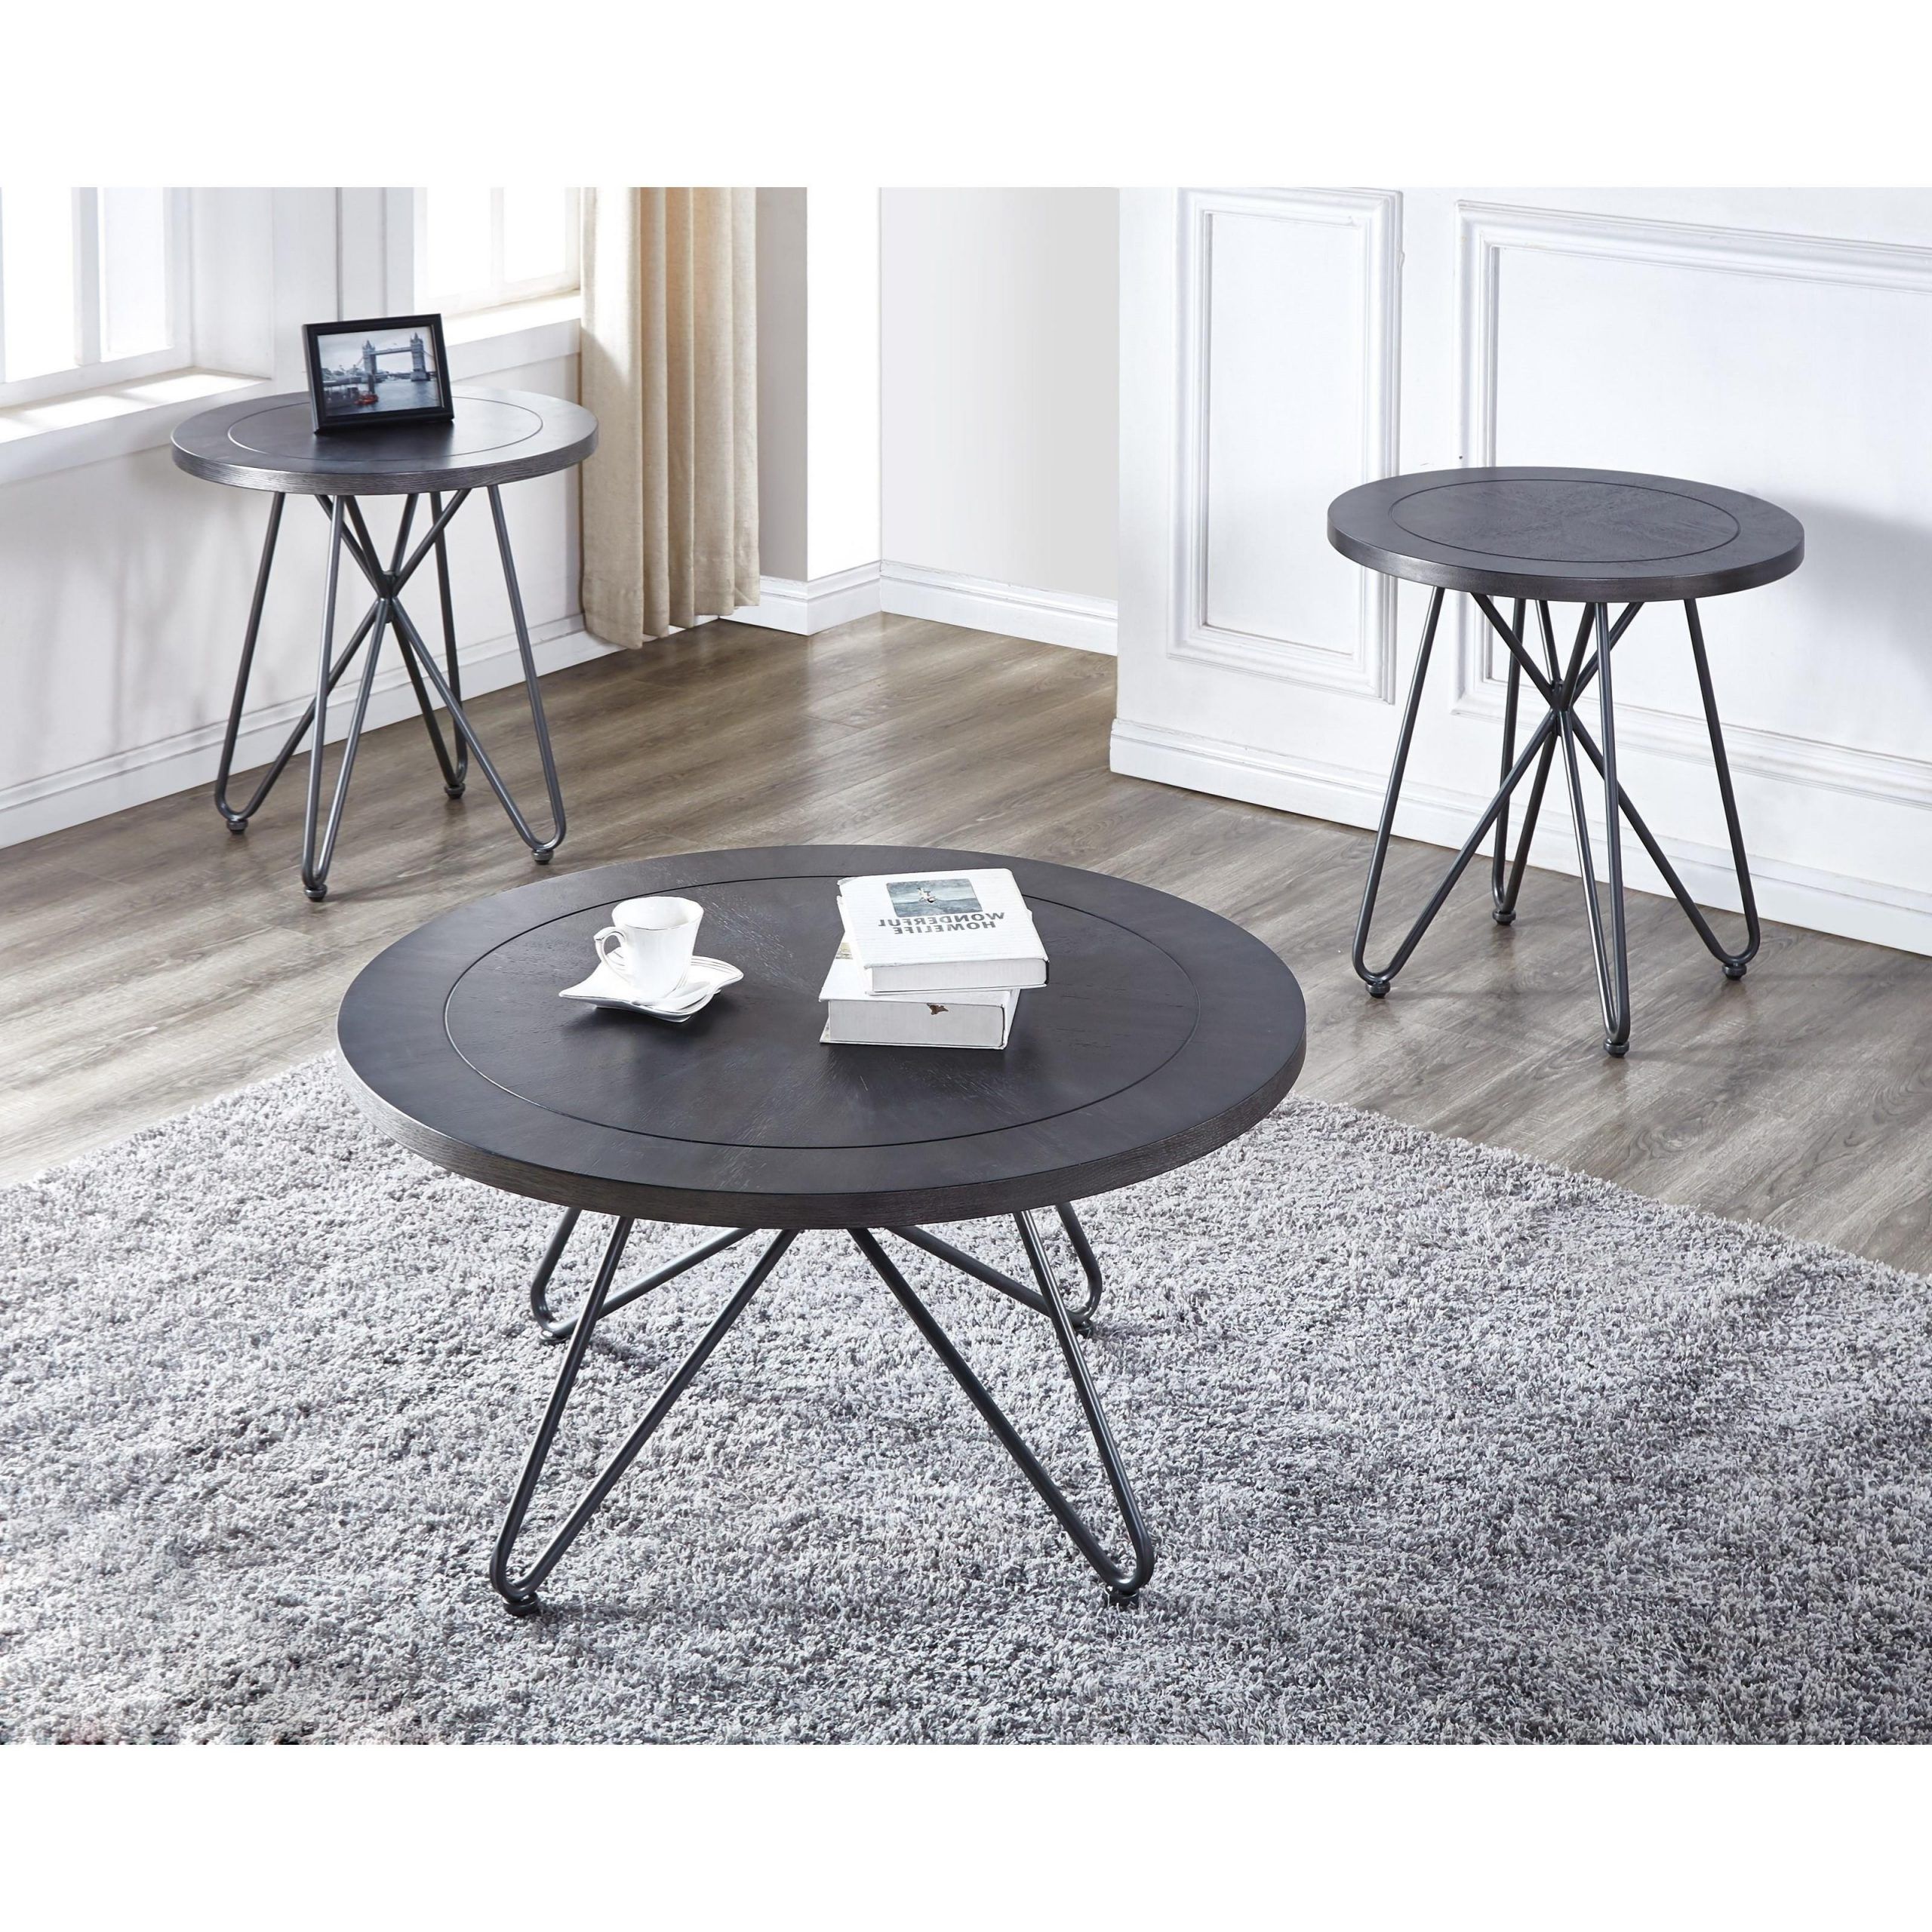 Steve Silver Derek Dk200c Industrial Round Cocktail Table With 2019 Metallic Silver Cocktail Tables (View 9 of 20)